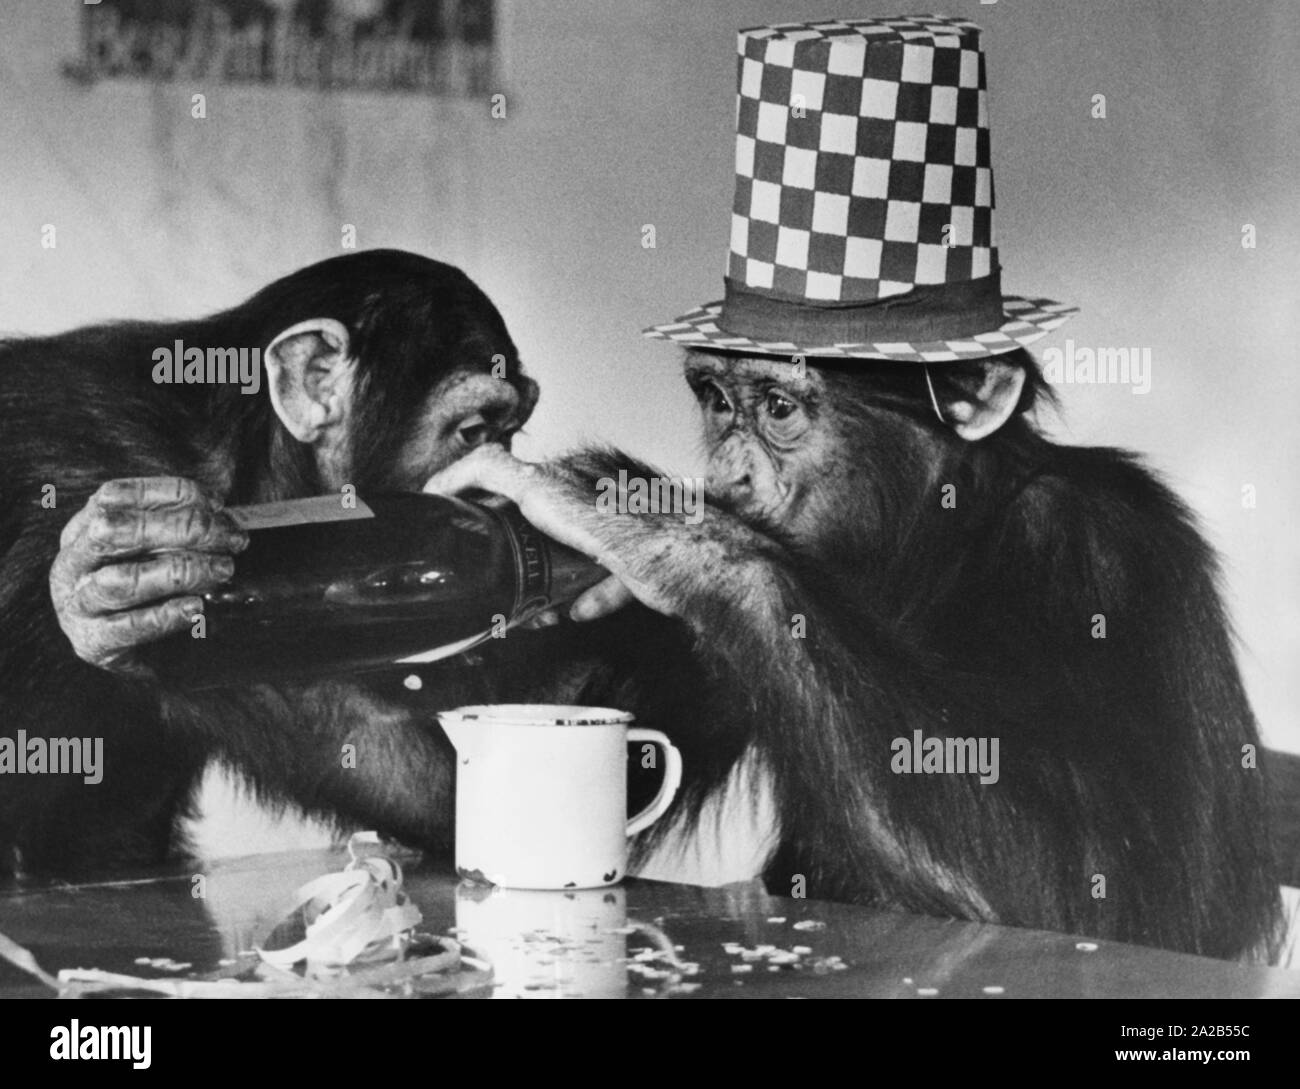 Two chimpanzees are sitting at the table and drink sparkling wine from a bottle. It could be an advertising (undated shot). Stock Photo